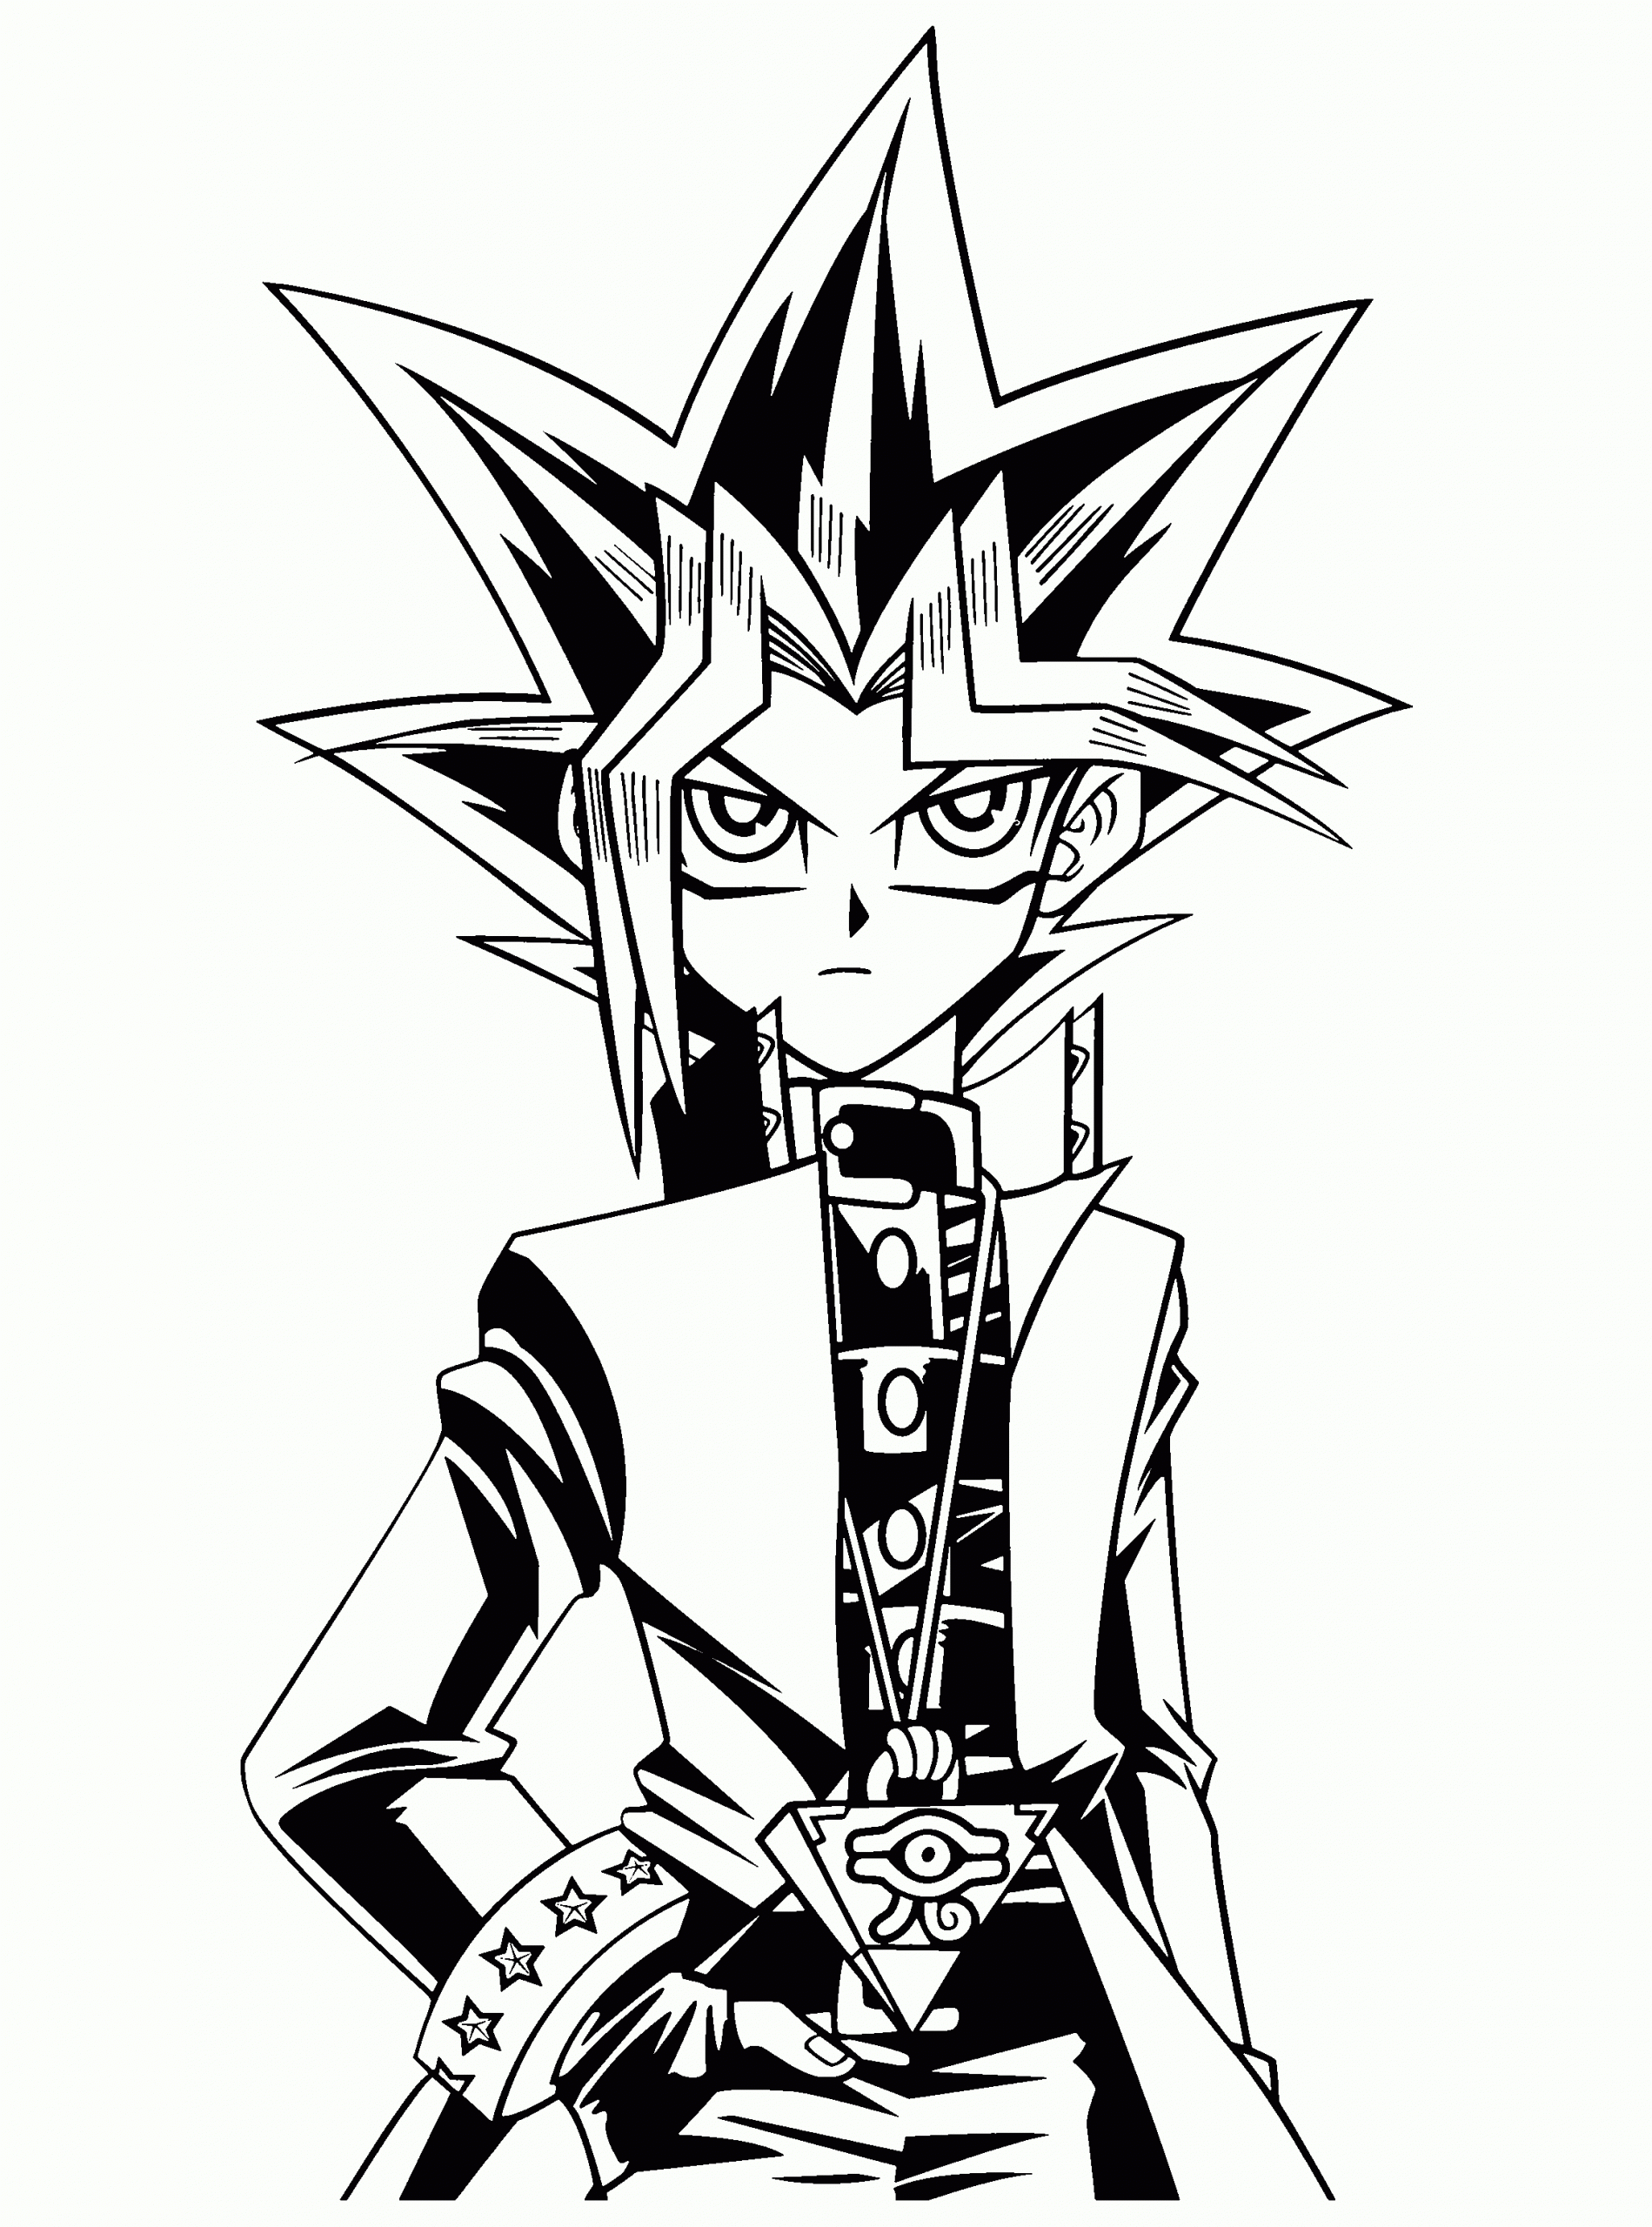 Coloring Page - Yu Gi Oh Coloring Pages 56 | Dragon concernant Coloriage Yu Gi Oh